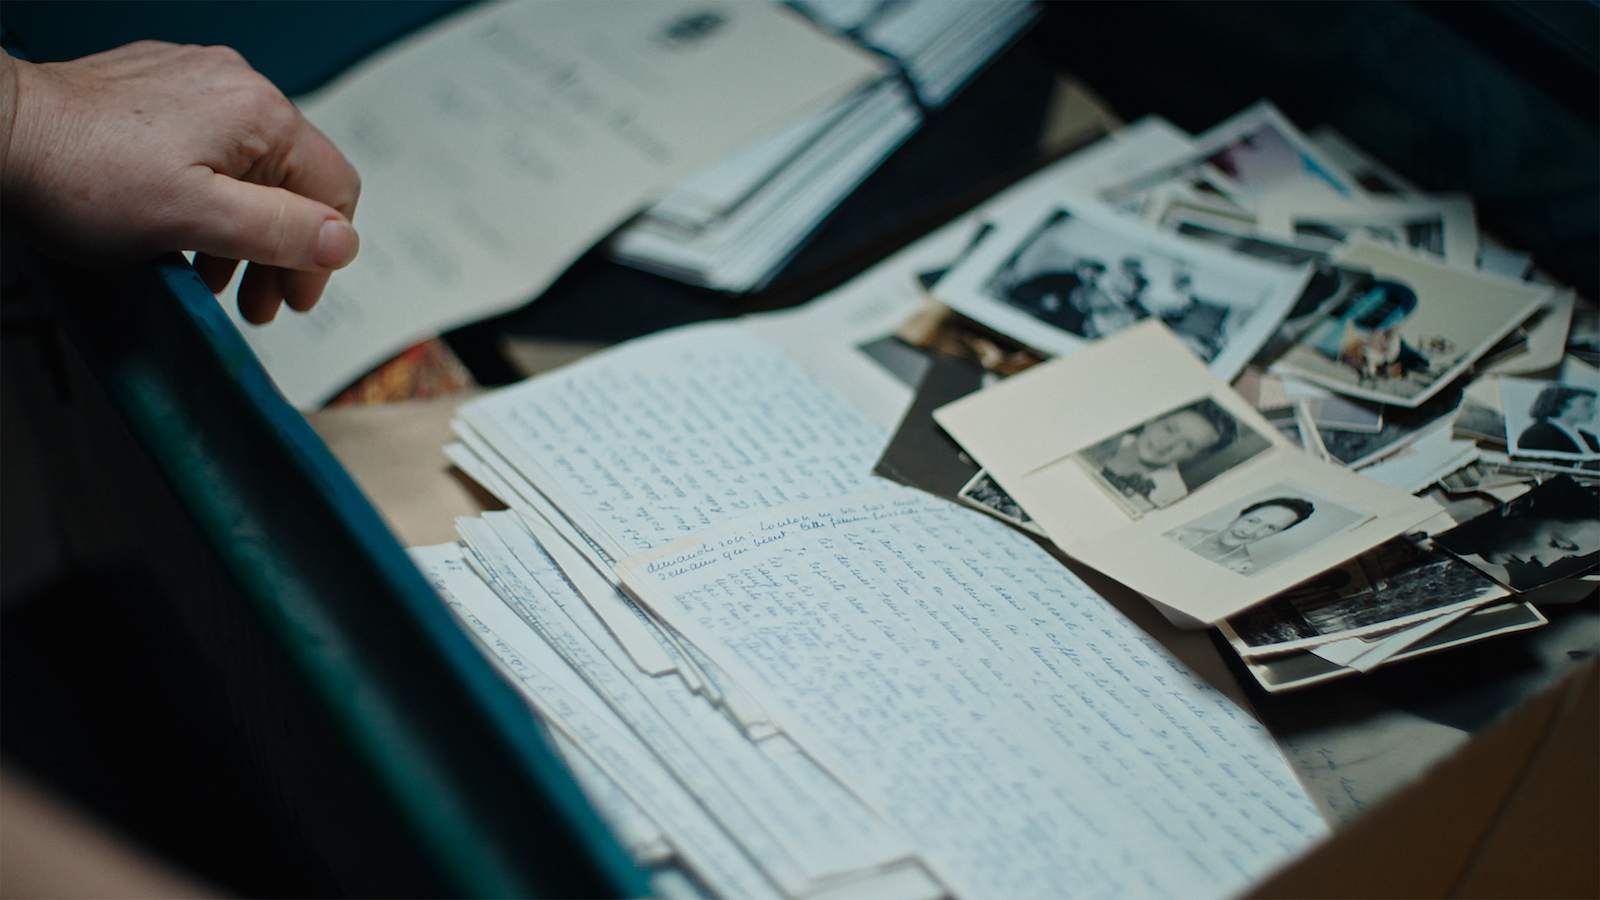 A hand hovers over a drawer full of photographs and handwritten documents